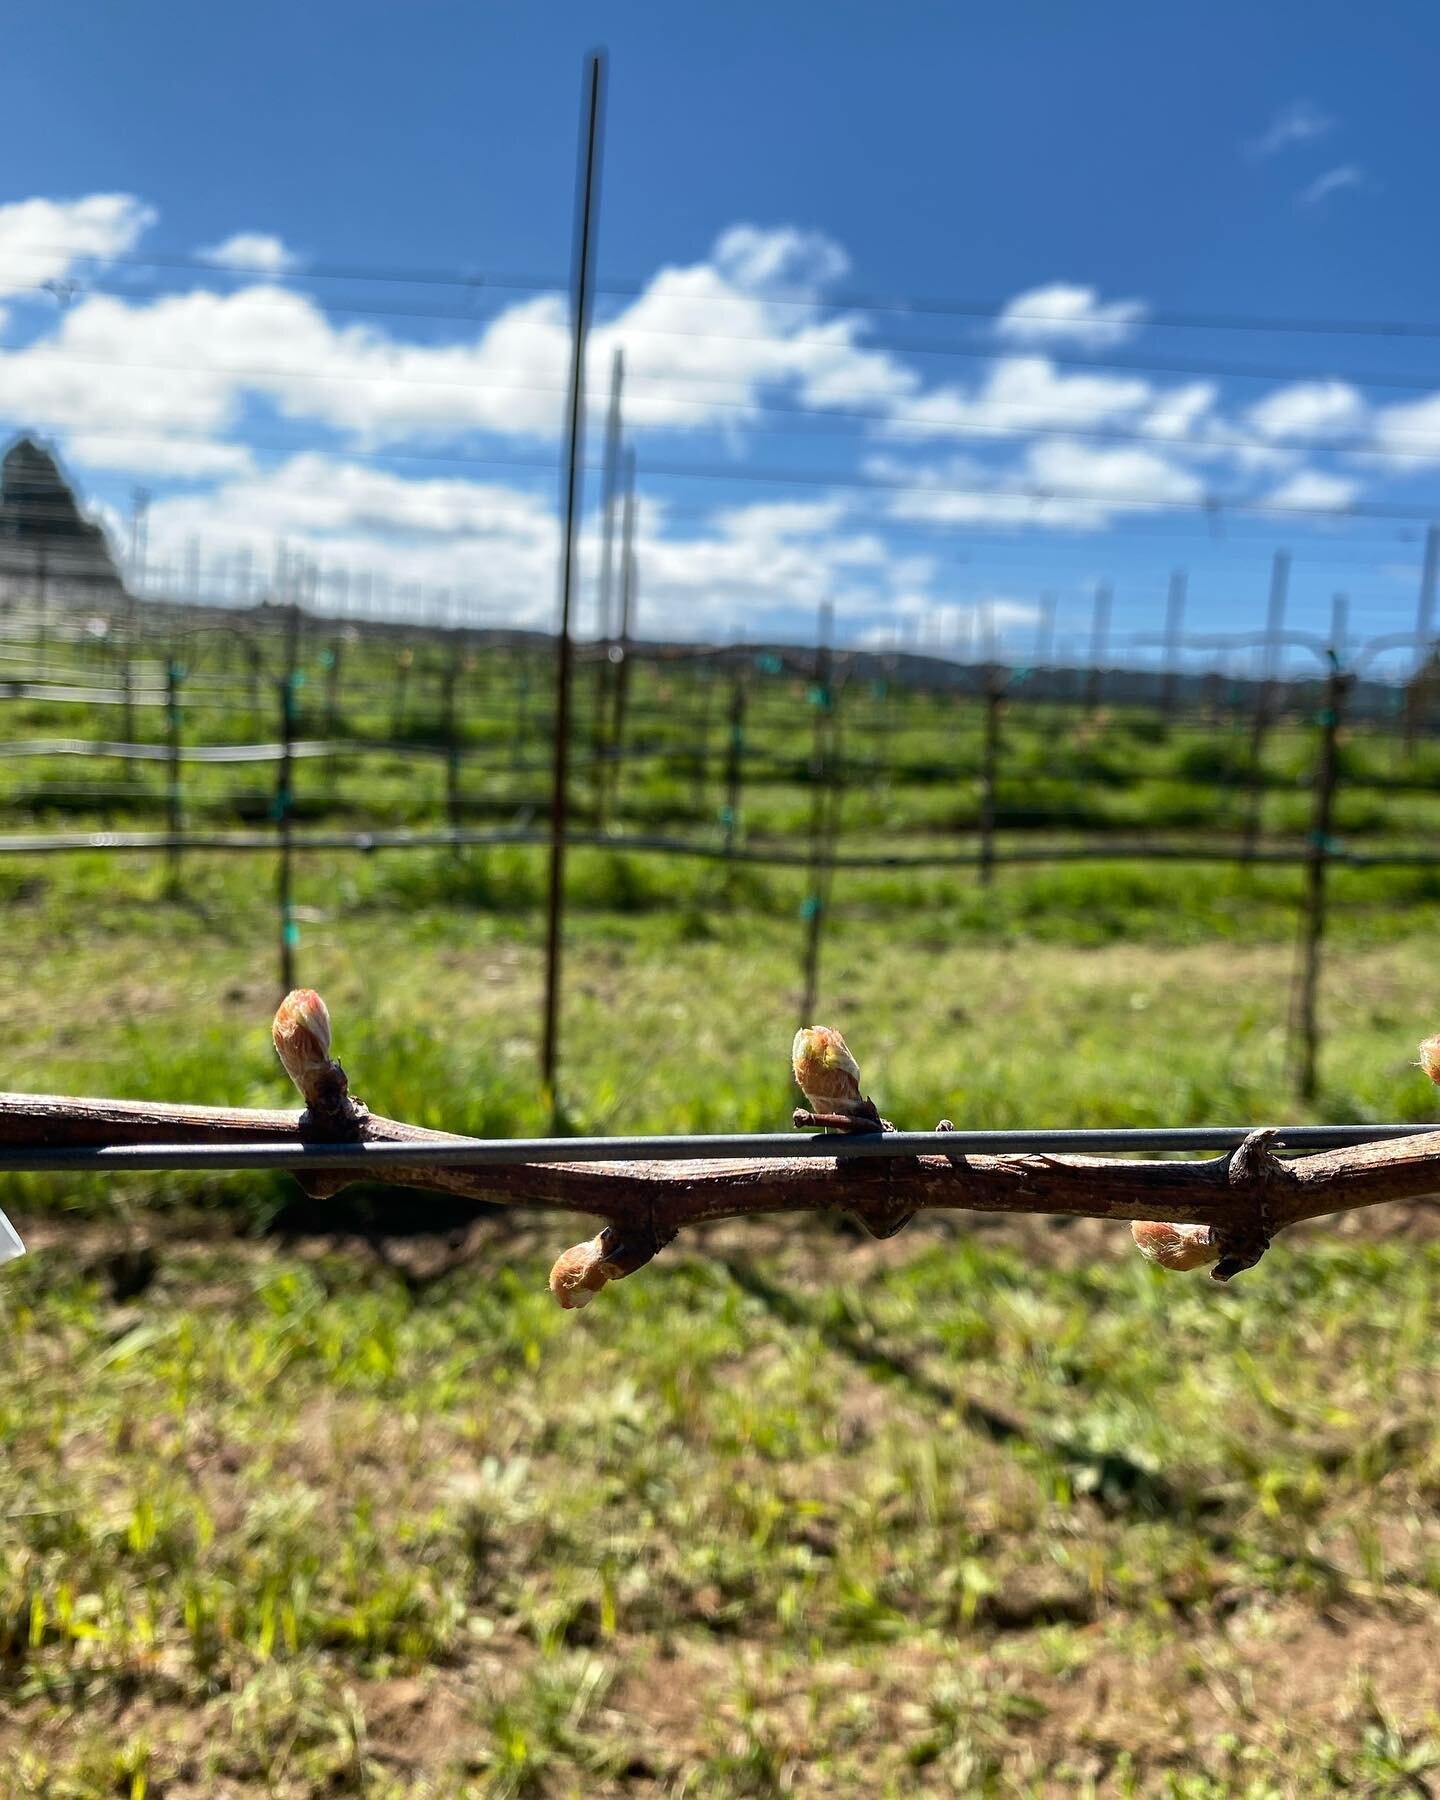 A new growing season begins at Wentworth Vineyard as we review verticals from the both Nash Mill and Wentworth with market partners @moorebrotherswinecompany and @martignetticompanies